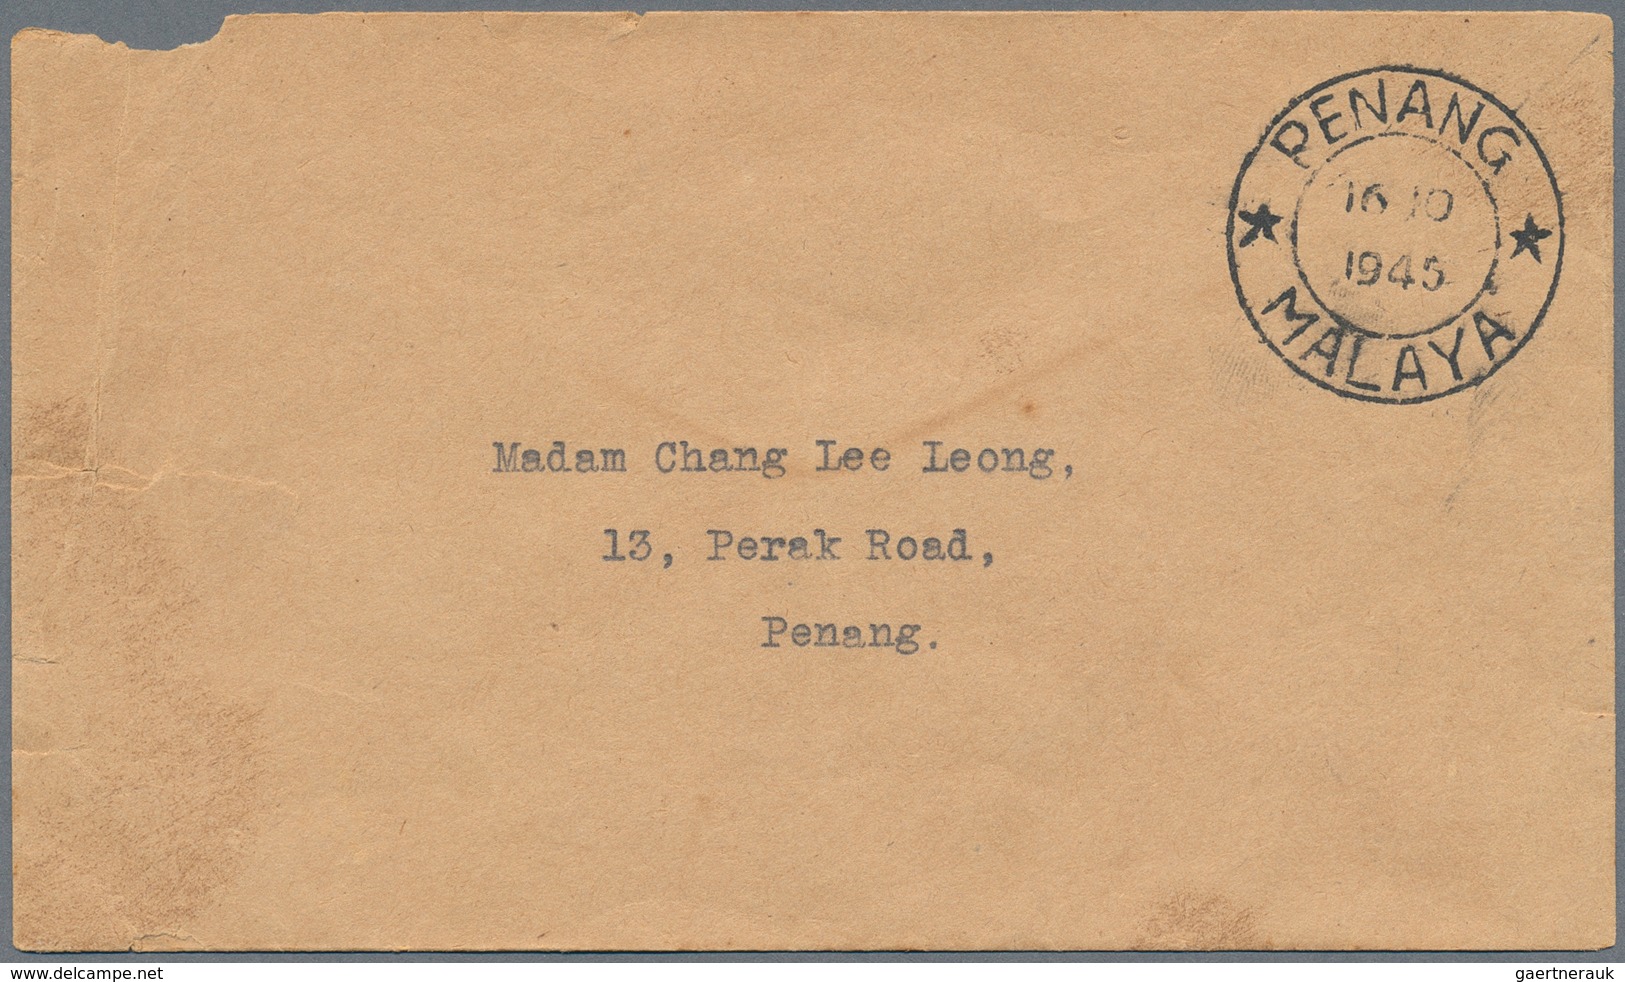 Malaiische Staaten - Penang: 1891/1945, used stationery cards (6, inc. local usage w.1893 2nd half r